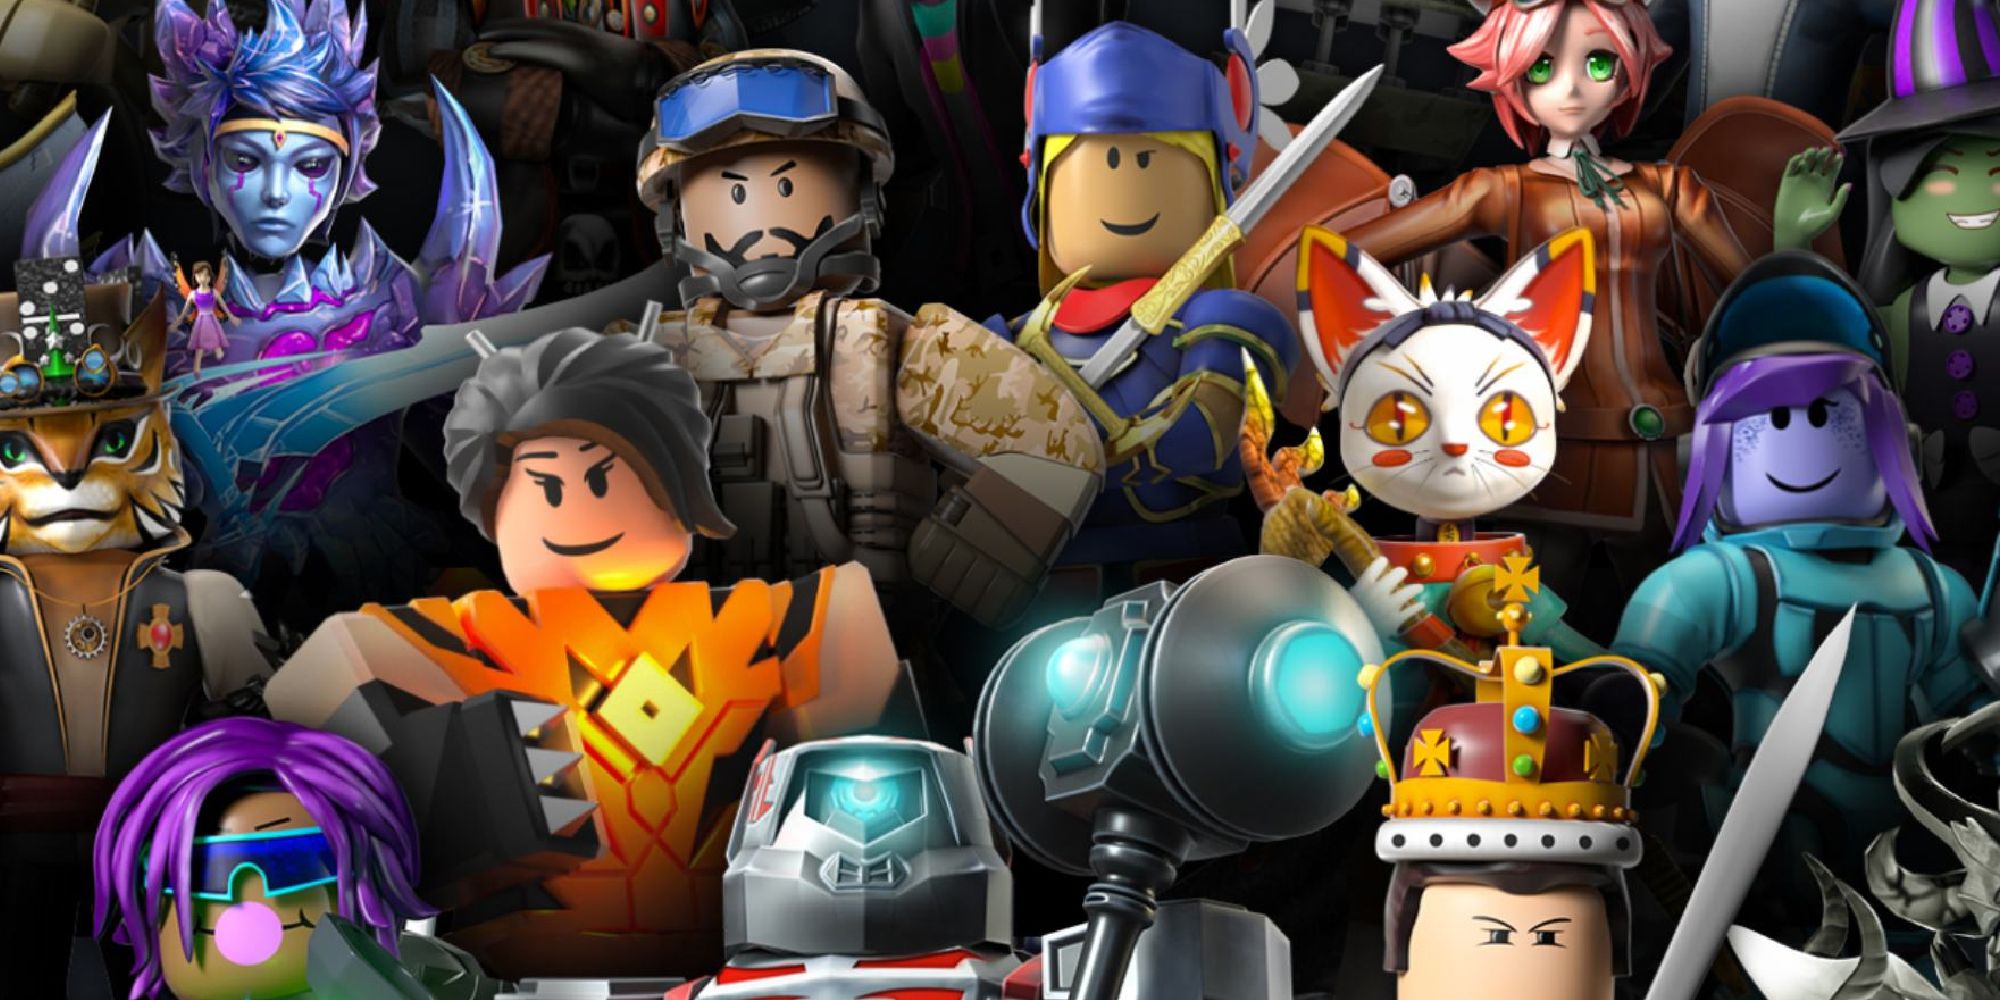 Roblox sues banned 'cybermob' leader for terrorizing the platform